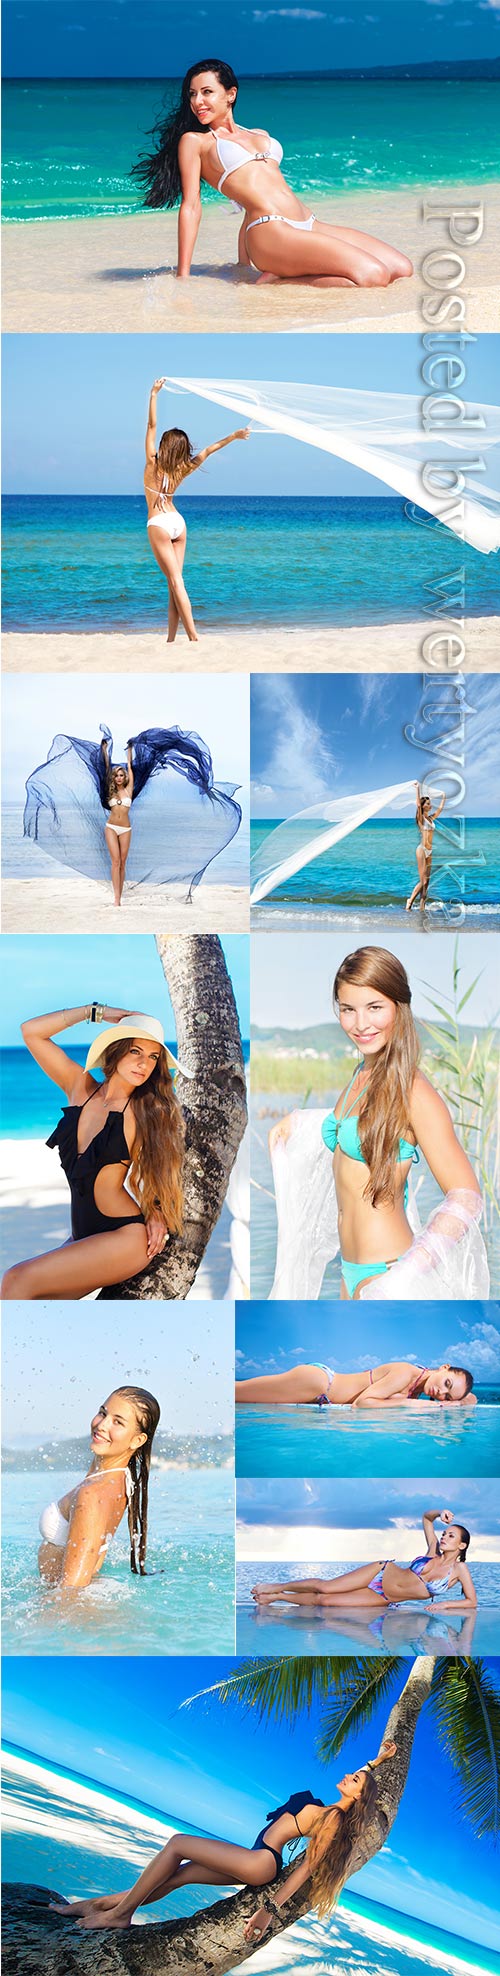 Girls in swimsuits on the seashore stock photo